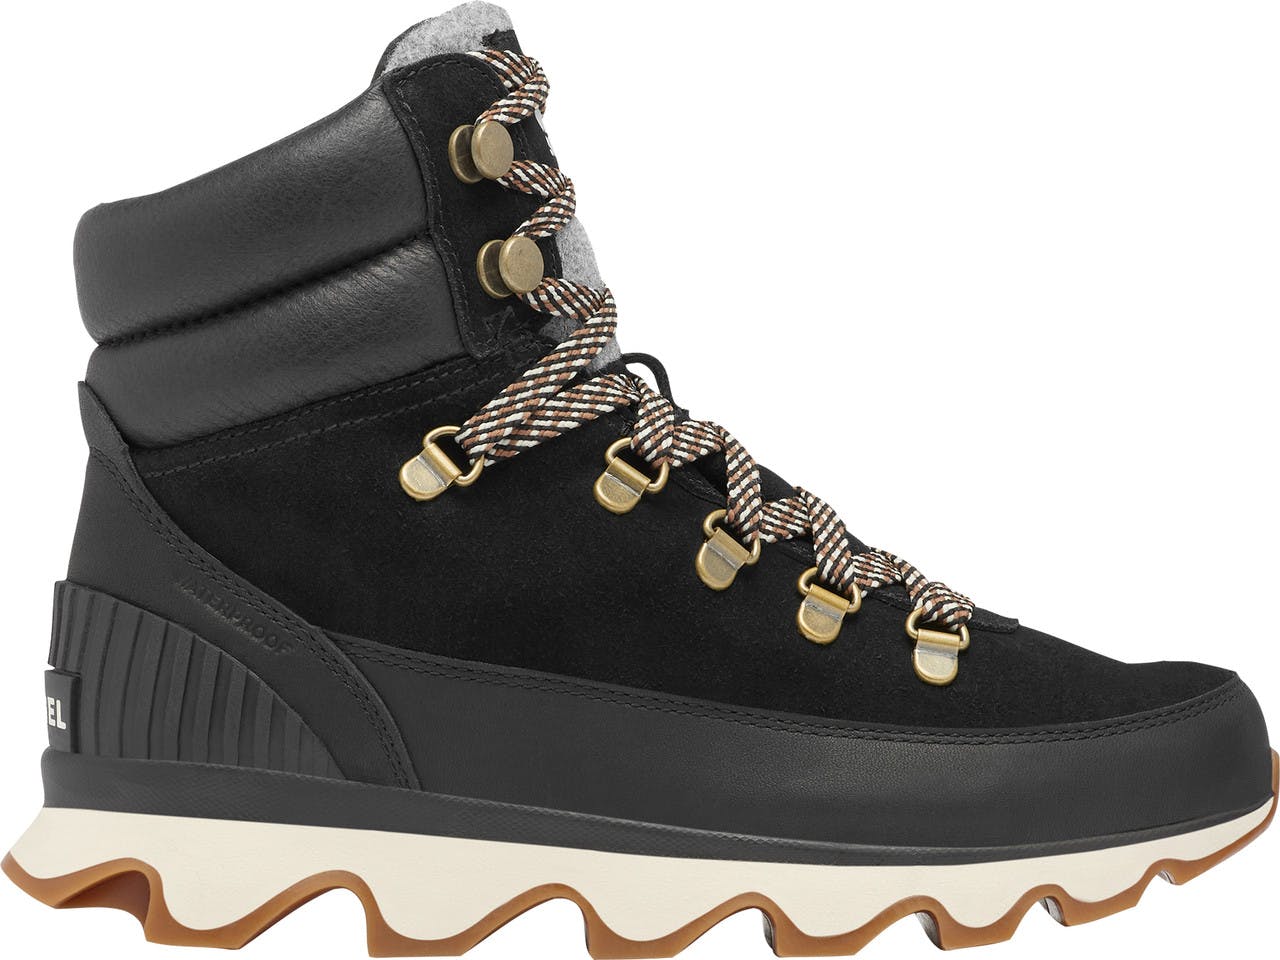 Kinetic Conquest Waterproof Boots Black